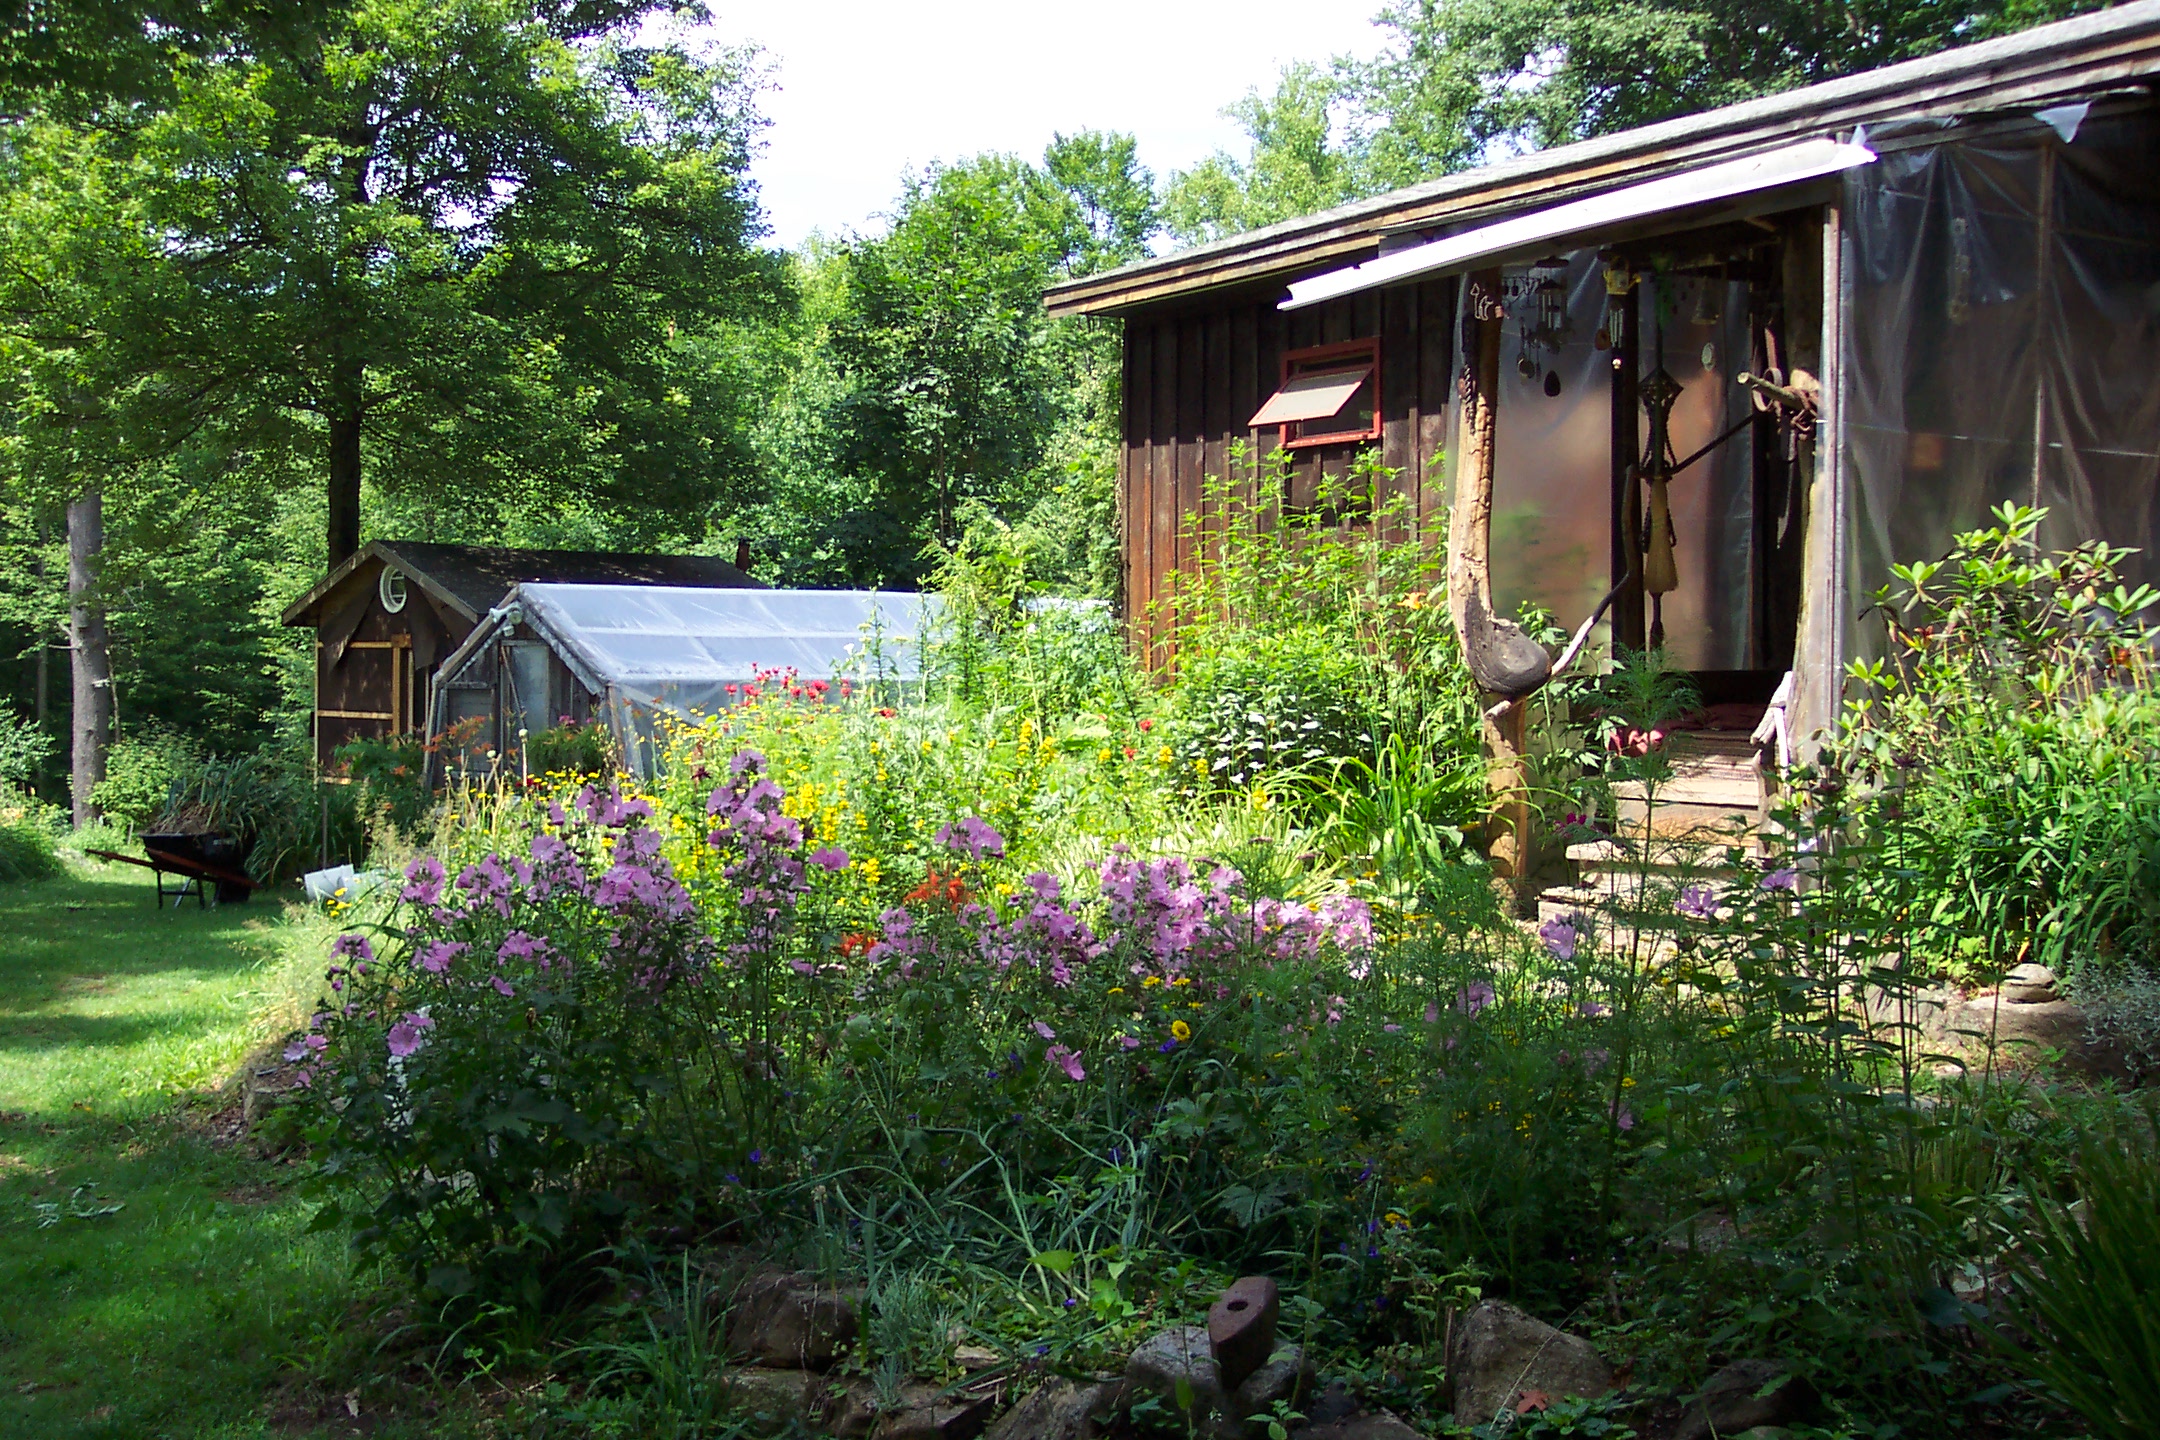 Rustic greenhouse amid blooming garden and trees.